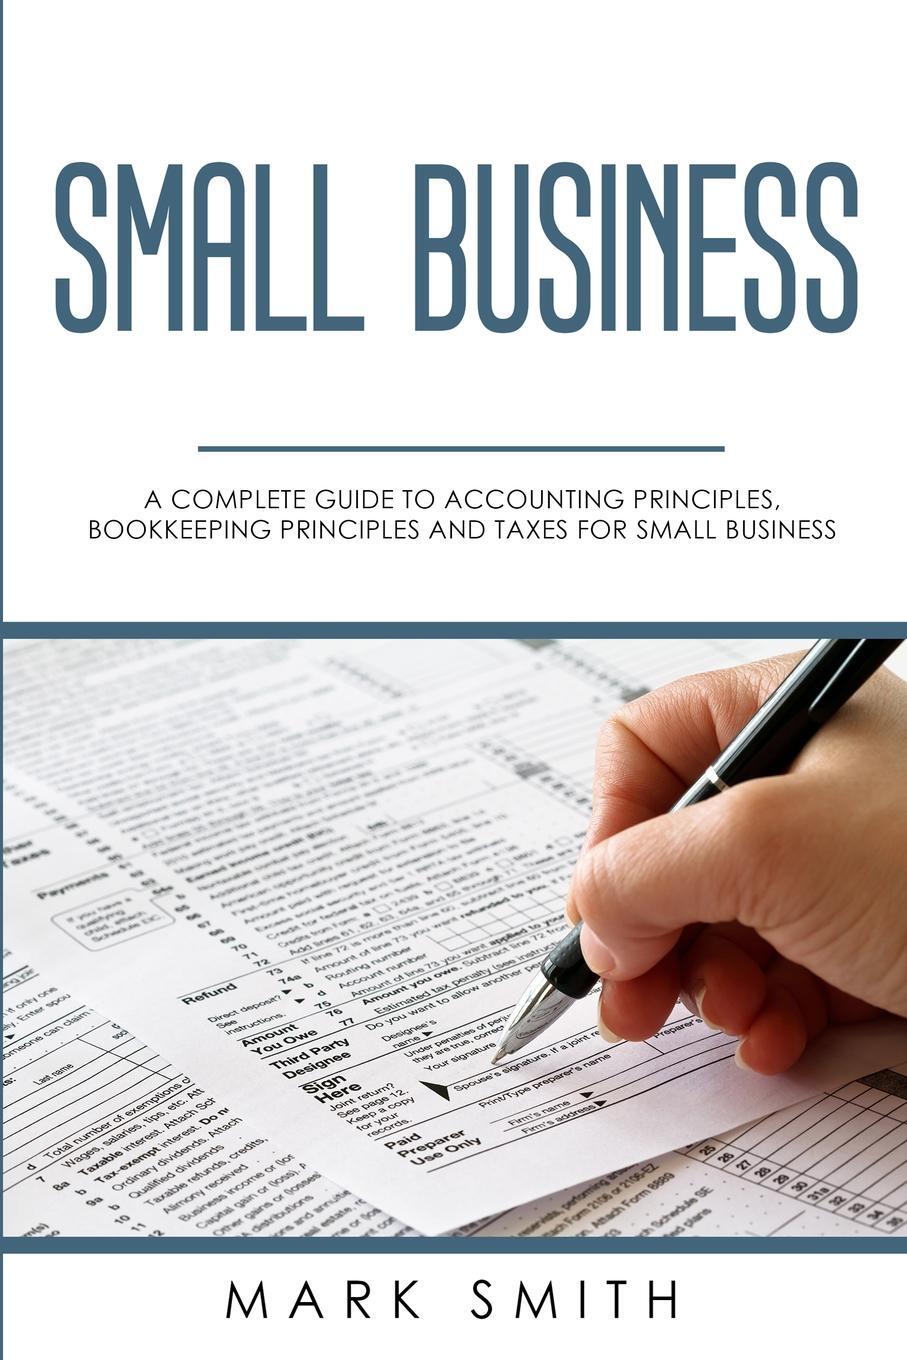 фото Small Business. A Complete Guide to Accounting Principles, Bookkeeping Principles and Taxes for Small Business